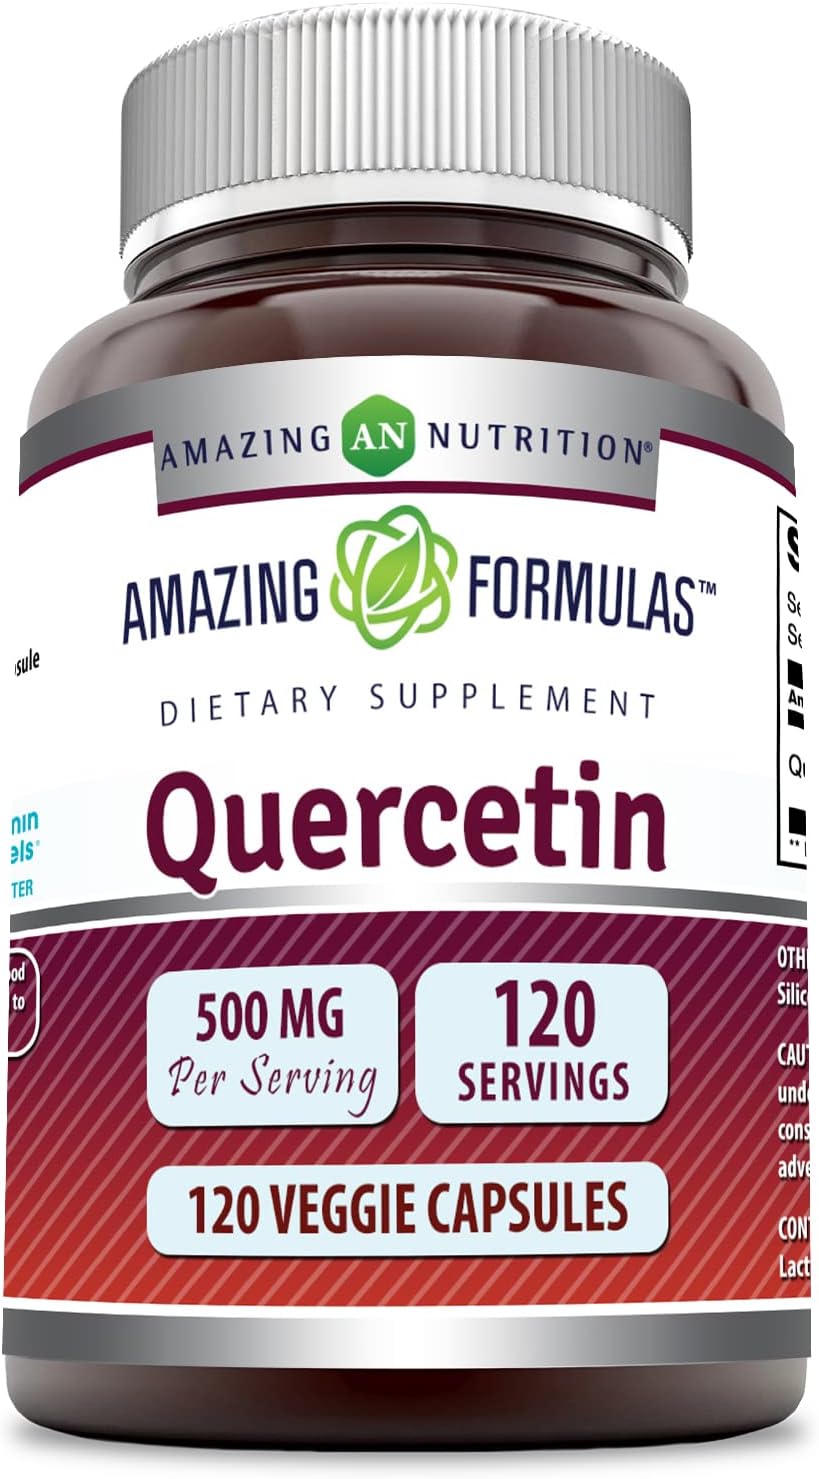 Amazing Formulas Quercetin 500mg 120 Veggie Capsules Supplement - Non-GMO - Gluten Free - Supports Overall Health  Well Being